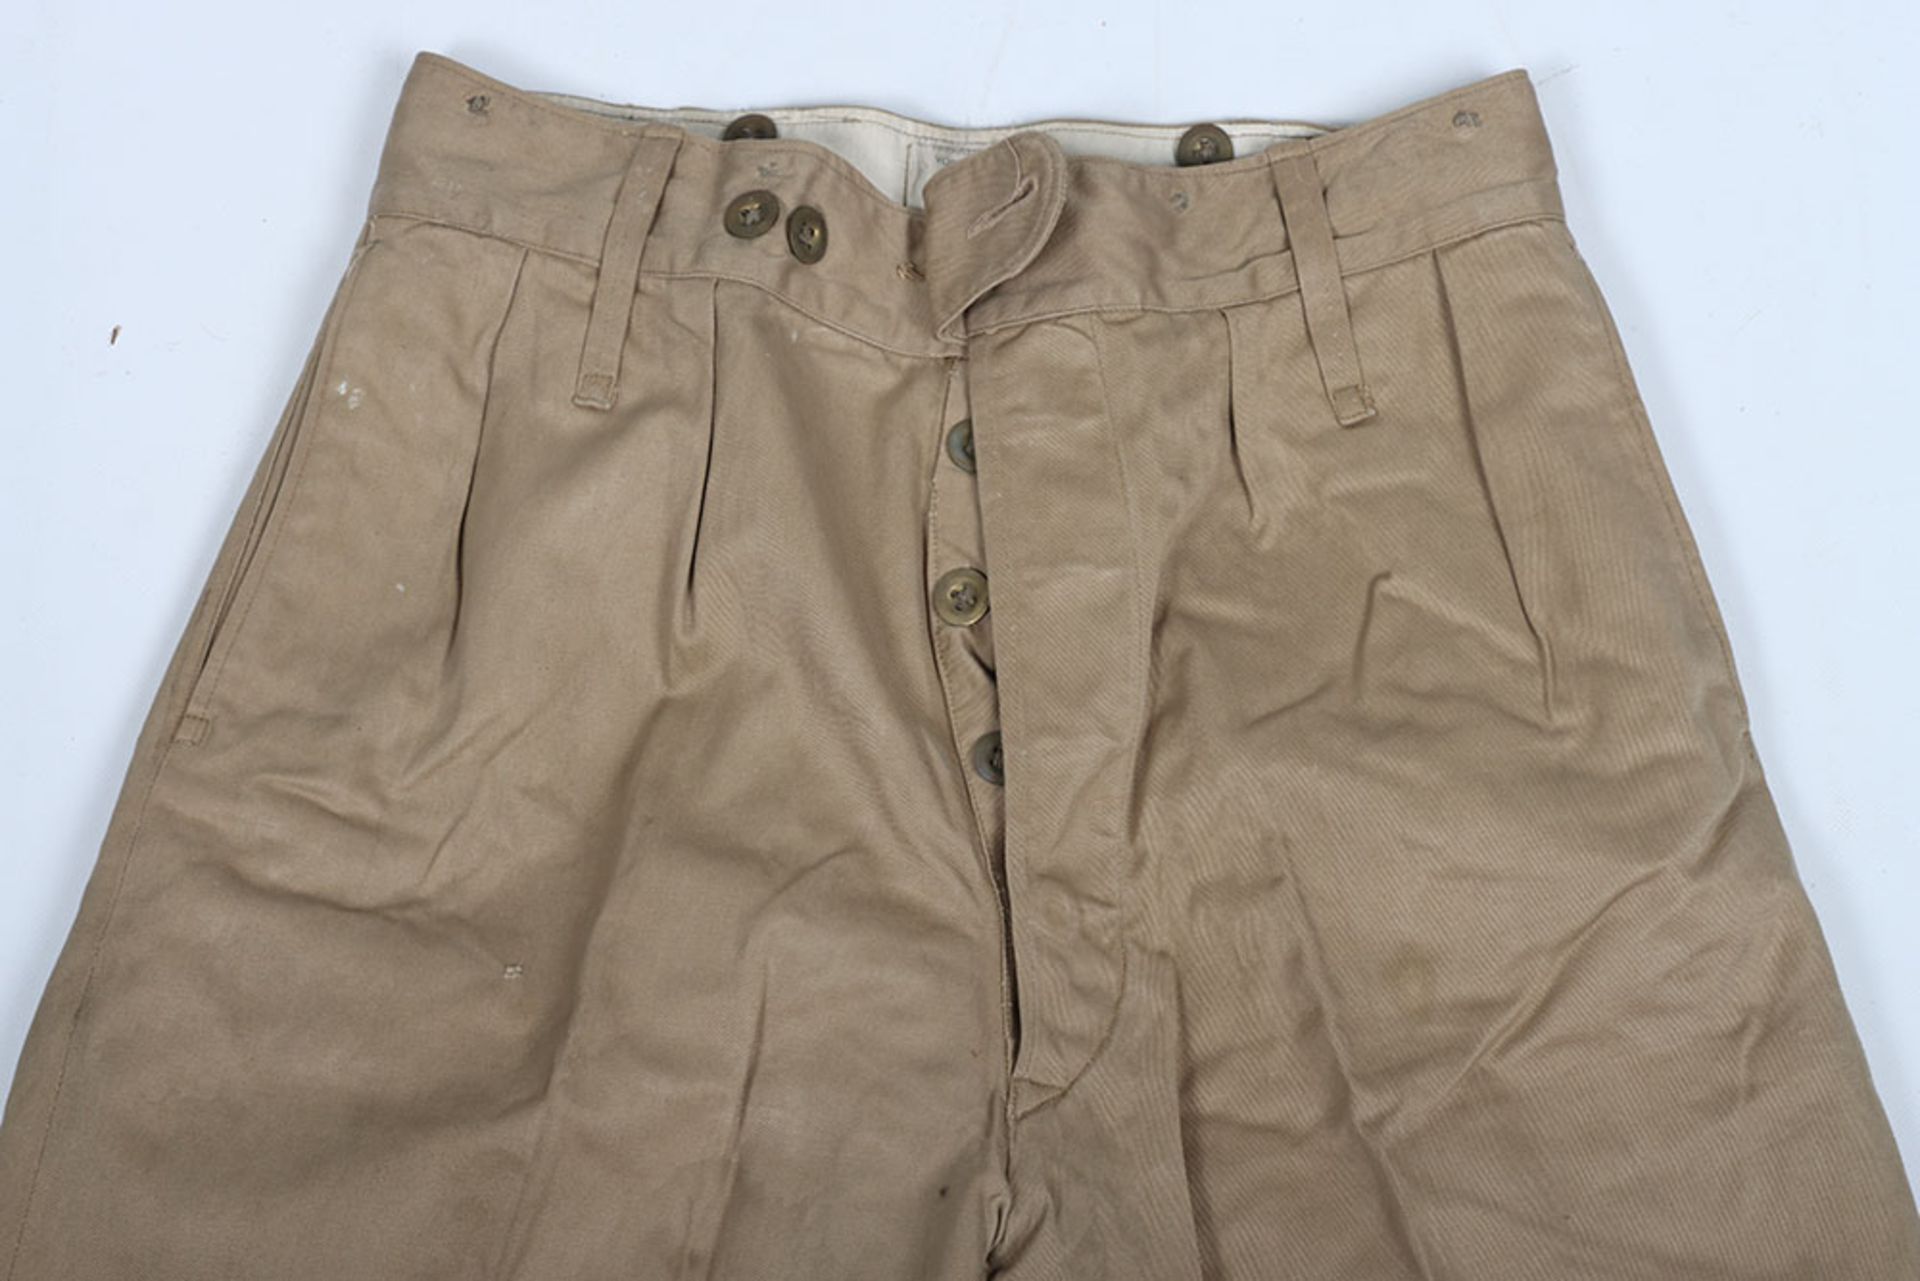 British Post War Royal Marines KD Tunic and Trousers Worn by Swimmer Canoeist T D Hughes During his - Image 12 of 15